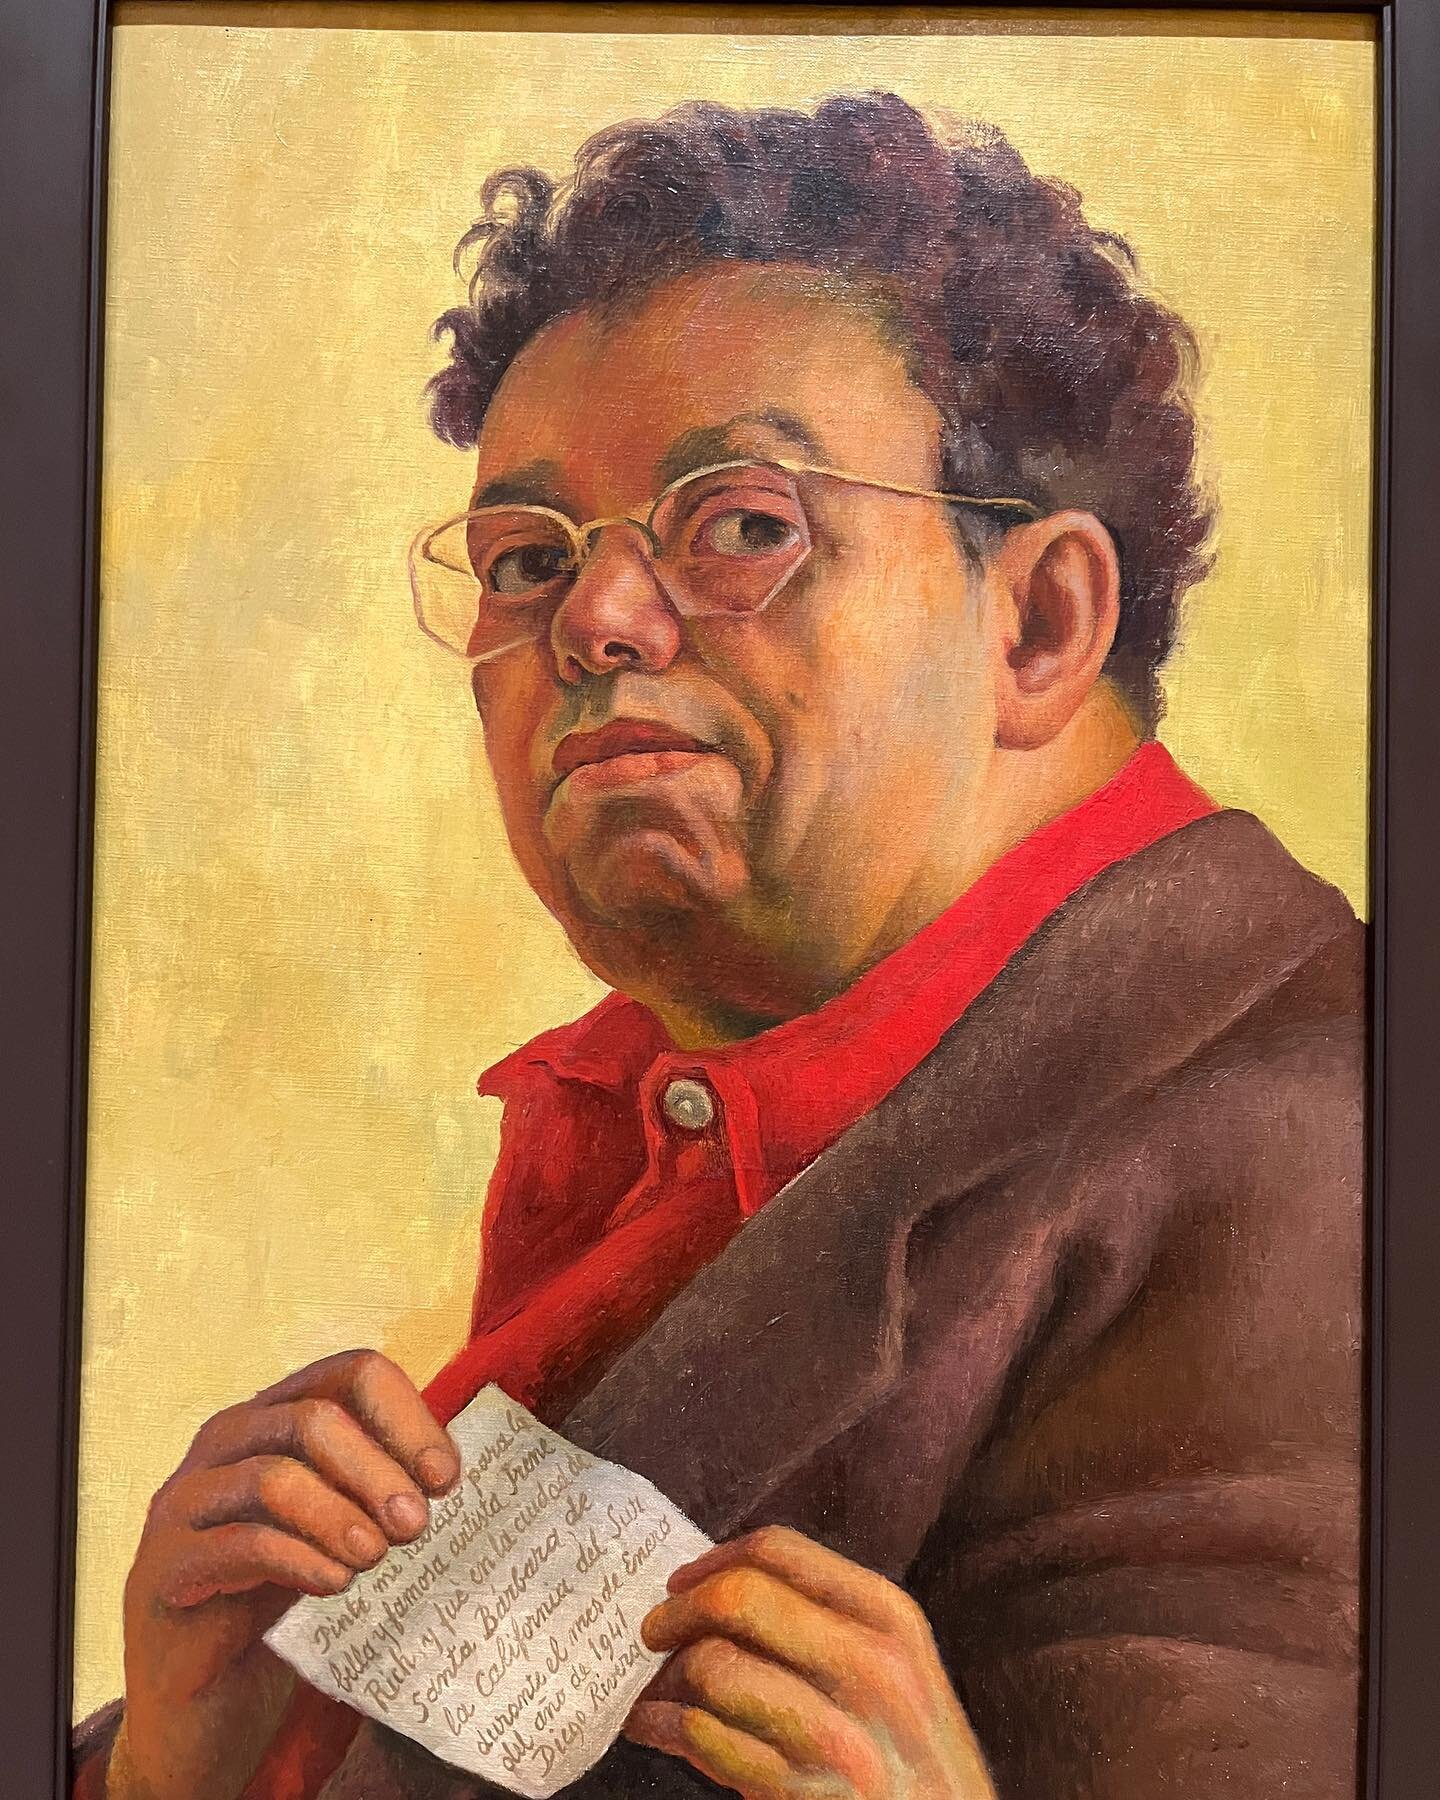 I didn&rsquo;t know much about Diego Rivera outside of Frida Kahlo. Cool to dive in. 

#diegorivera